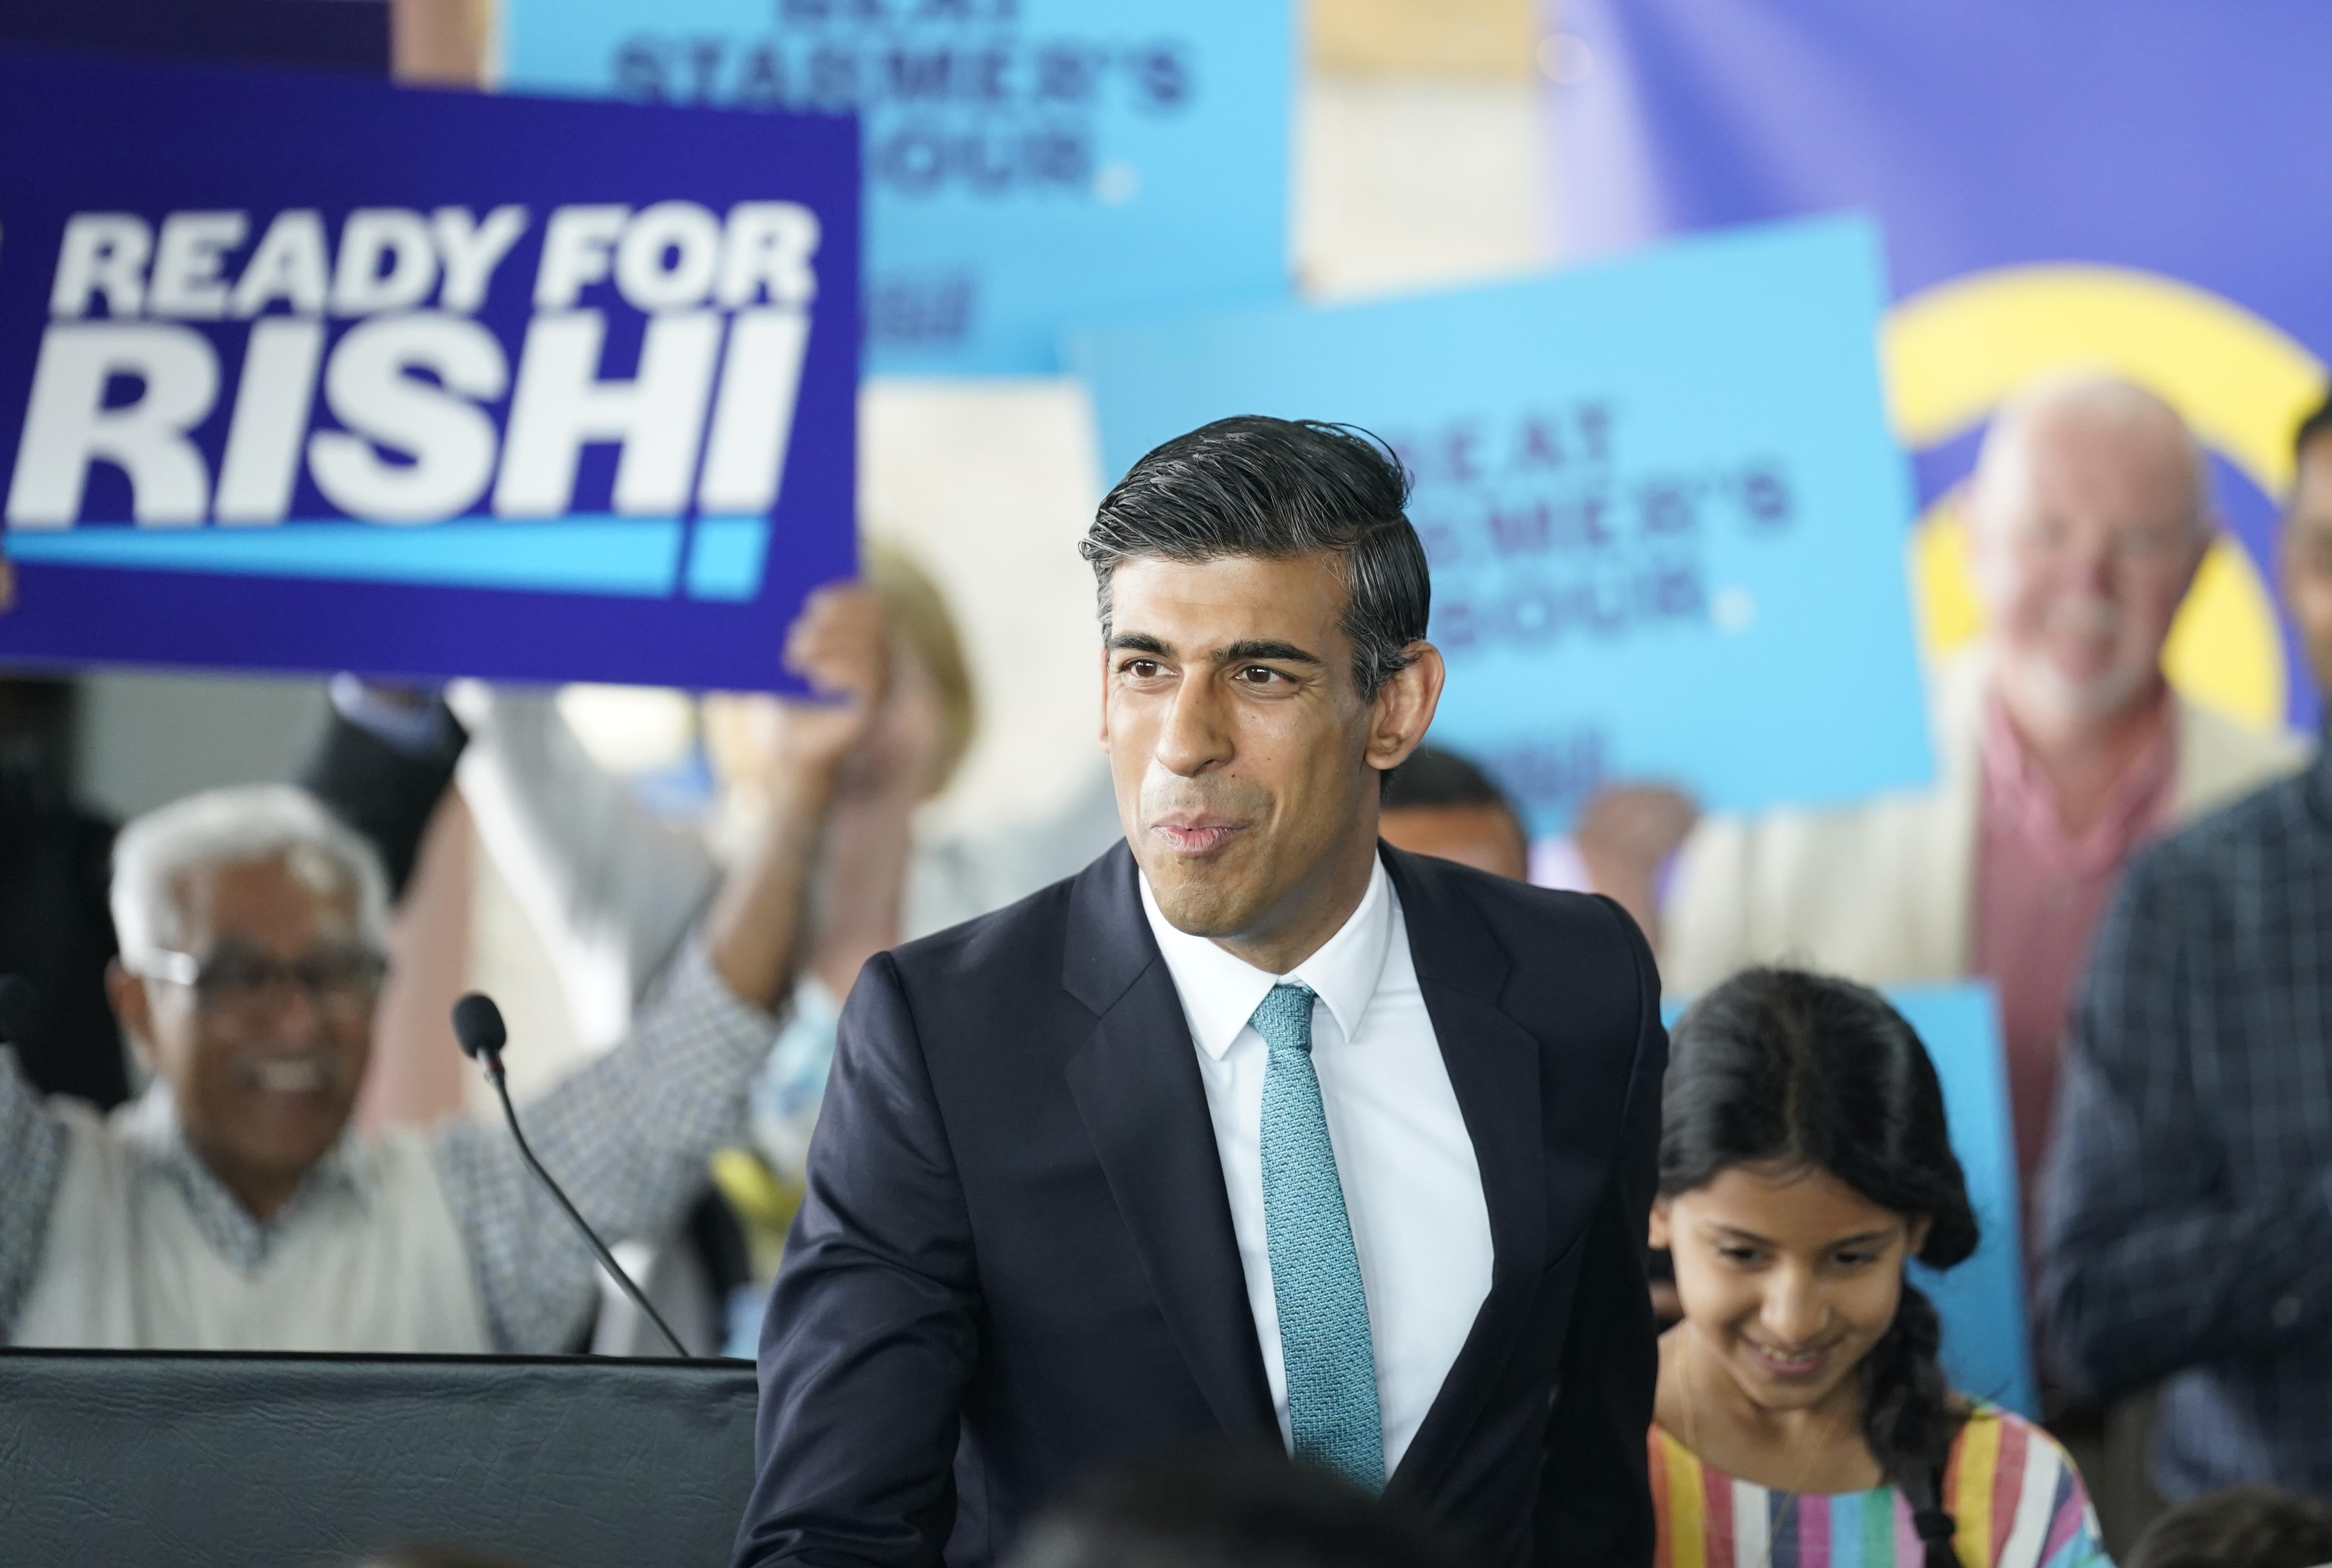 Rishi Sunak on a visit to Grantham as part of his campaign to become leader of the Conservative Party